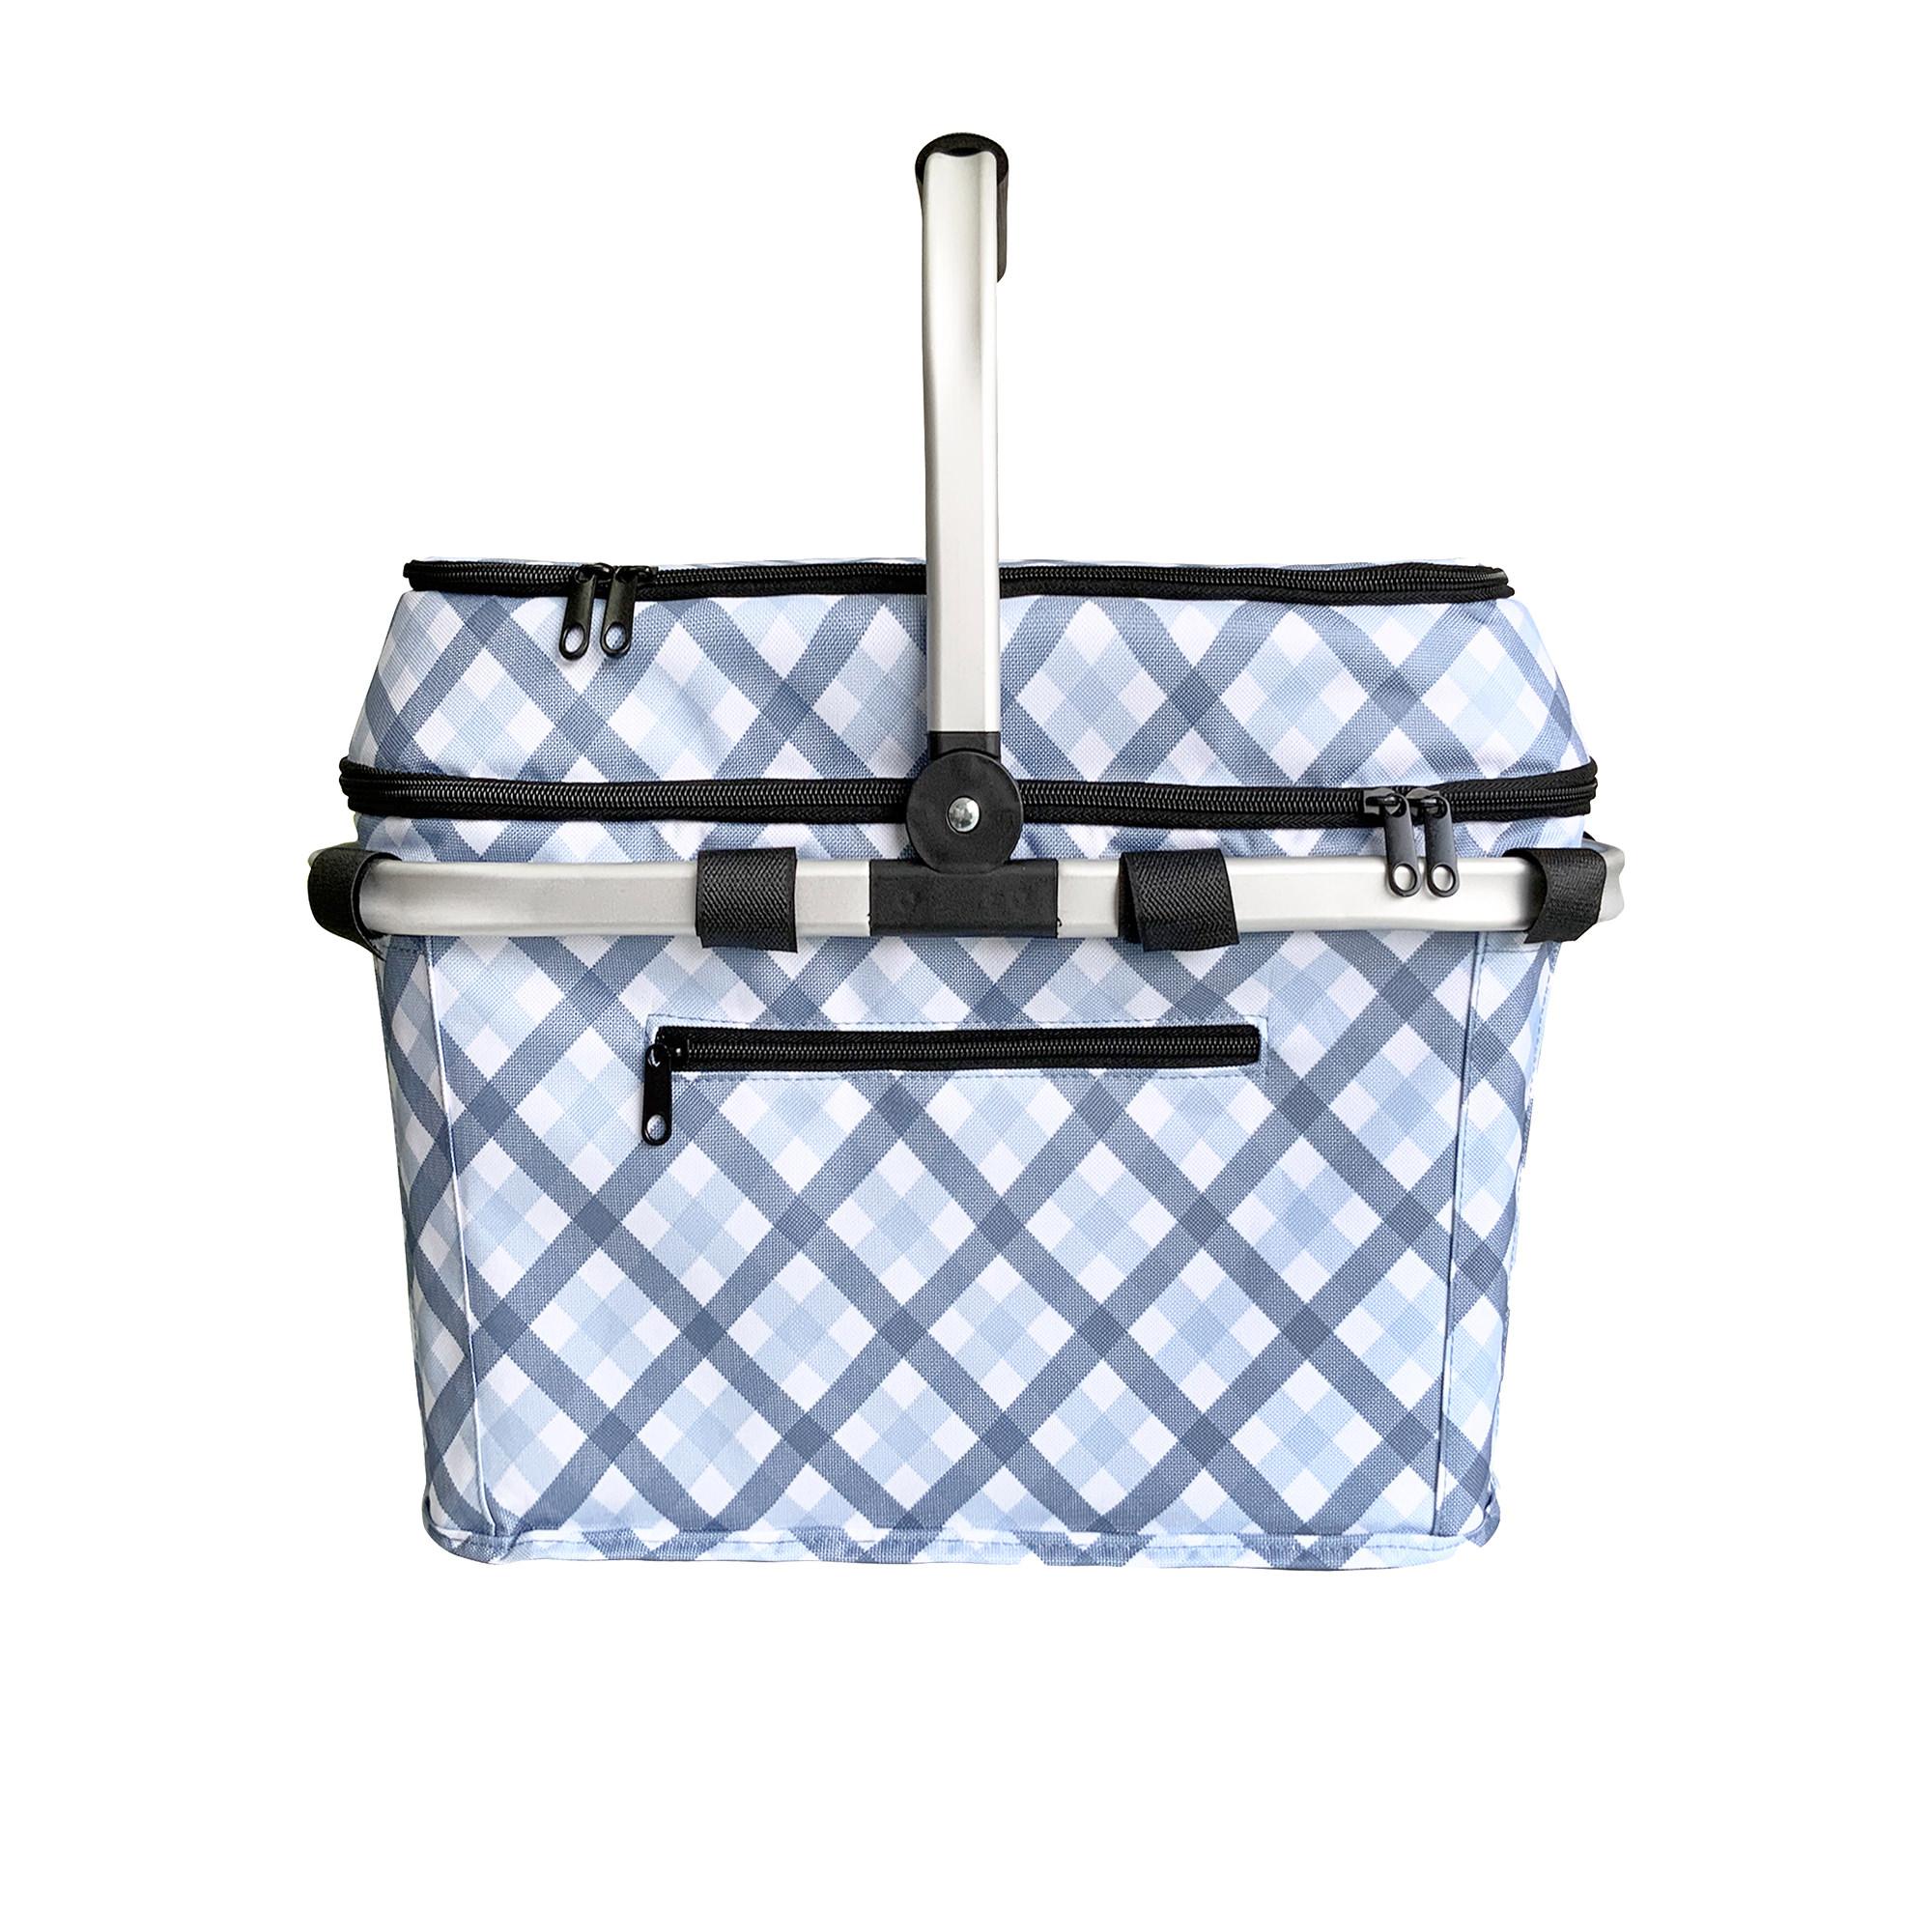 Sachi Fabric 4 Person Insulated Picnic Basket Blue Gingham Image 3